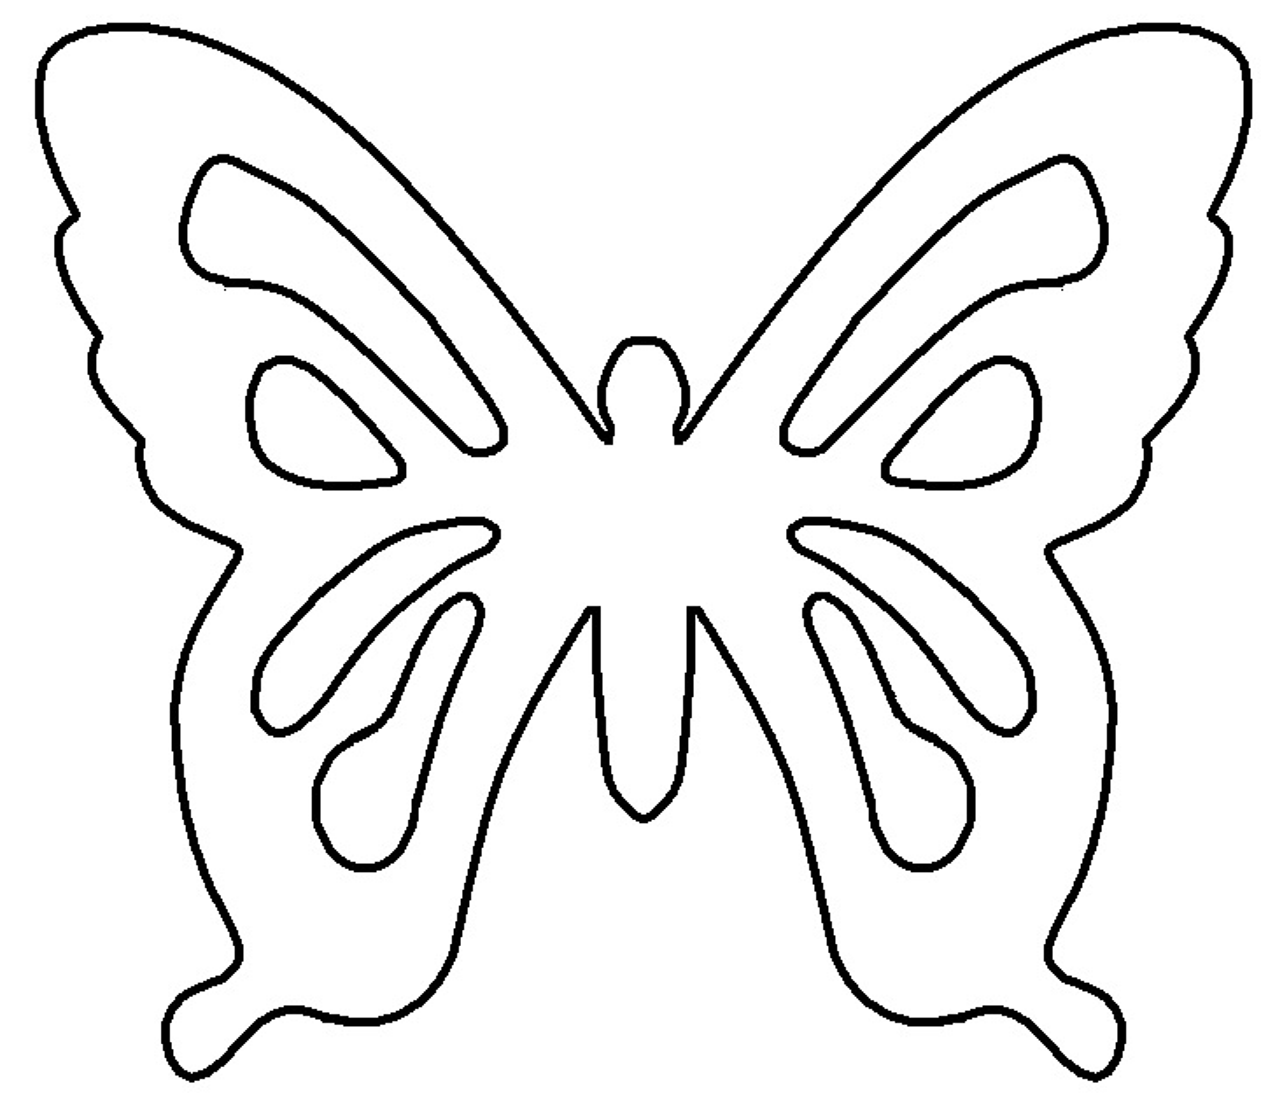 Outlines Of Butterflies